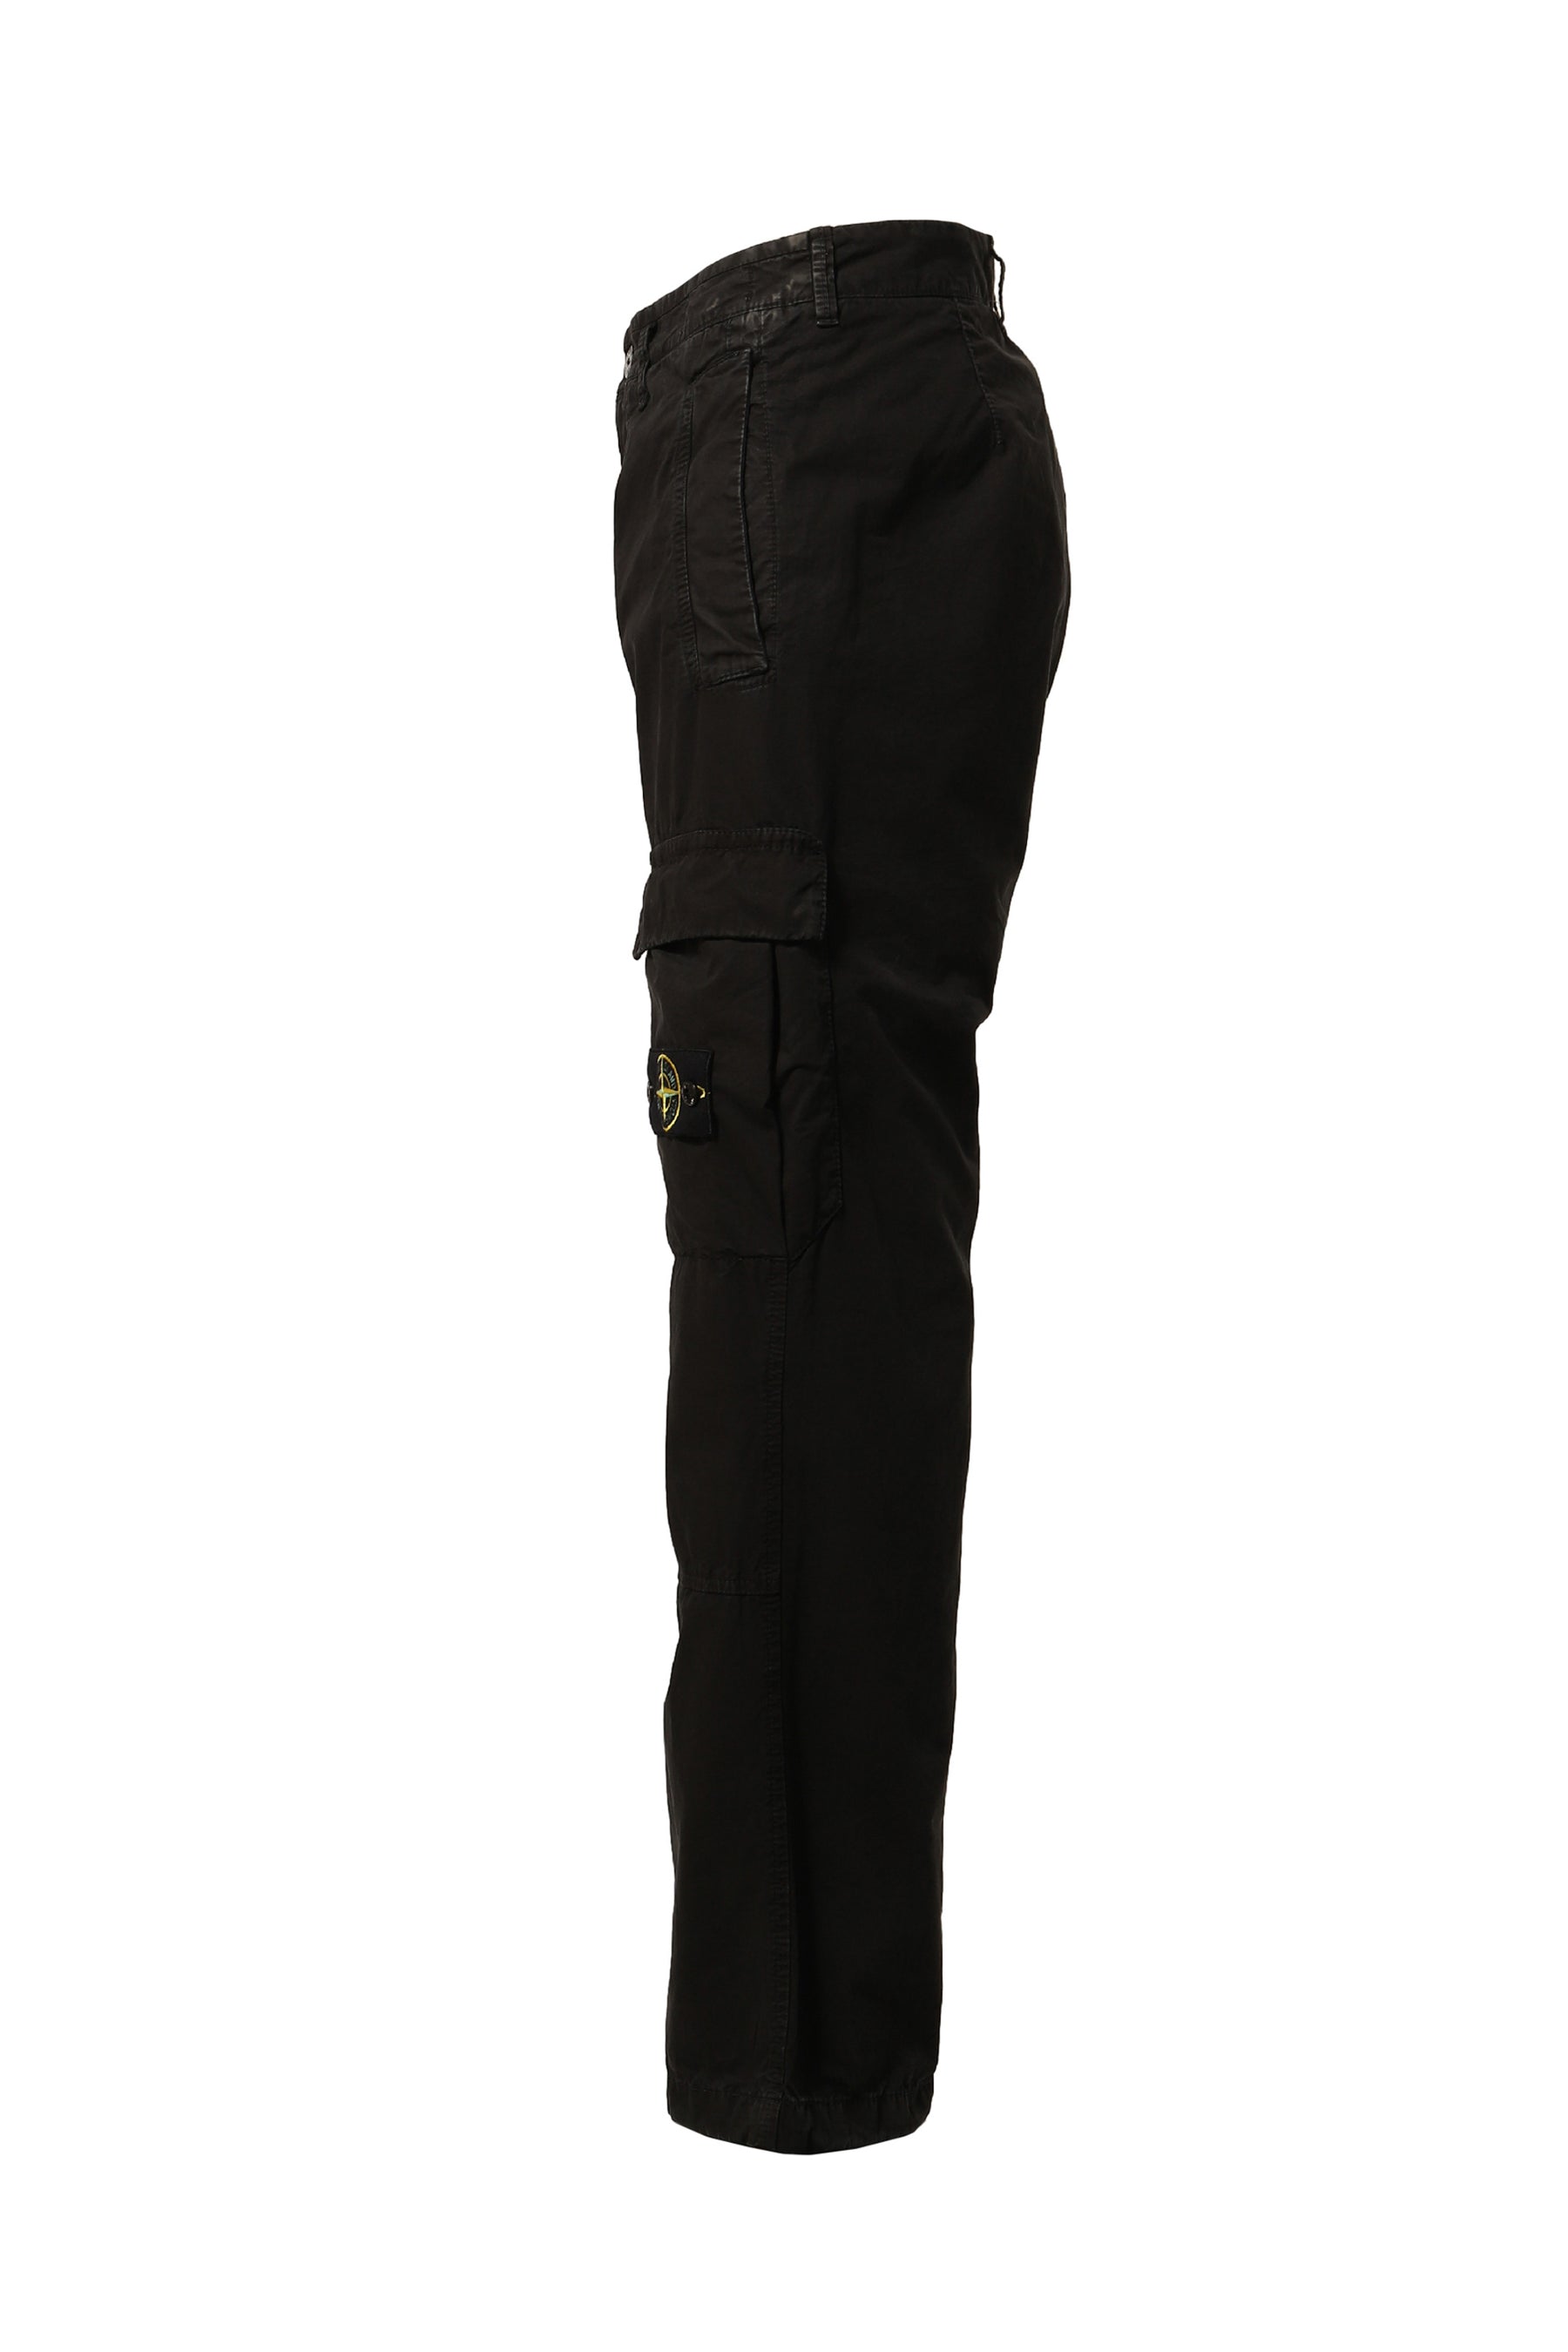 DYEING WIDE CARGO PANTS / BLK